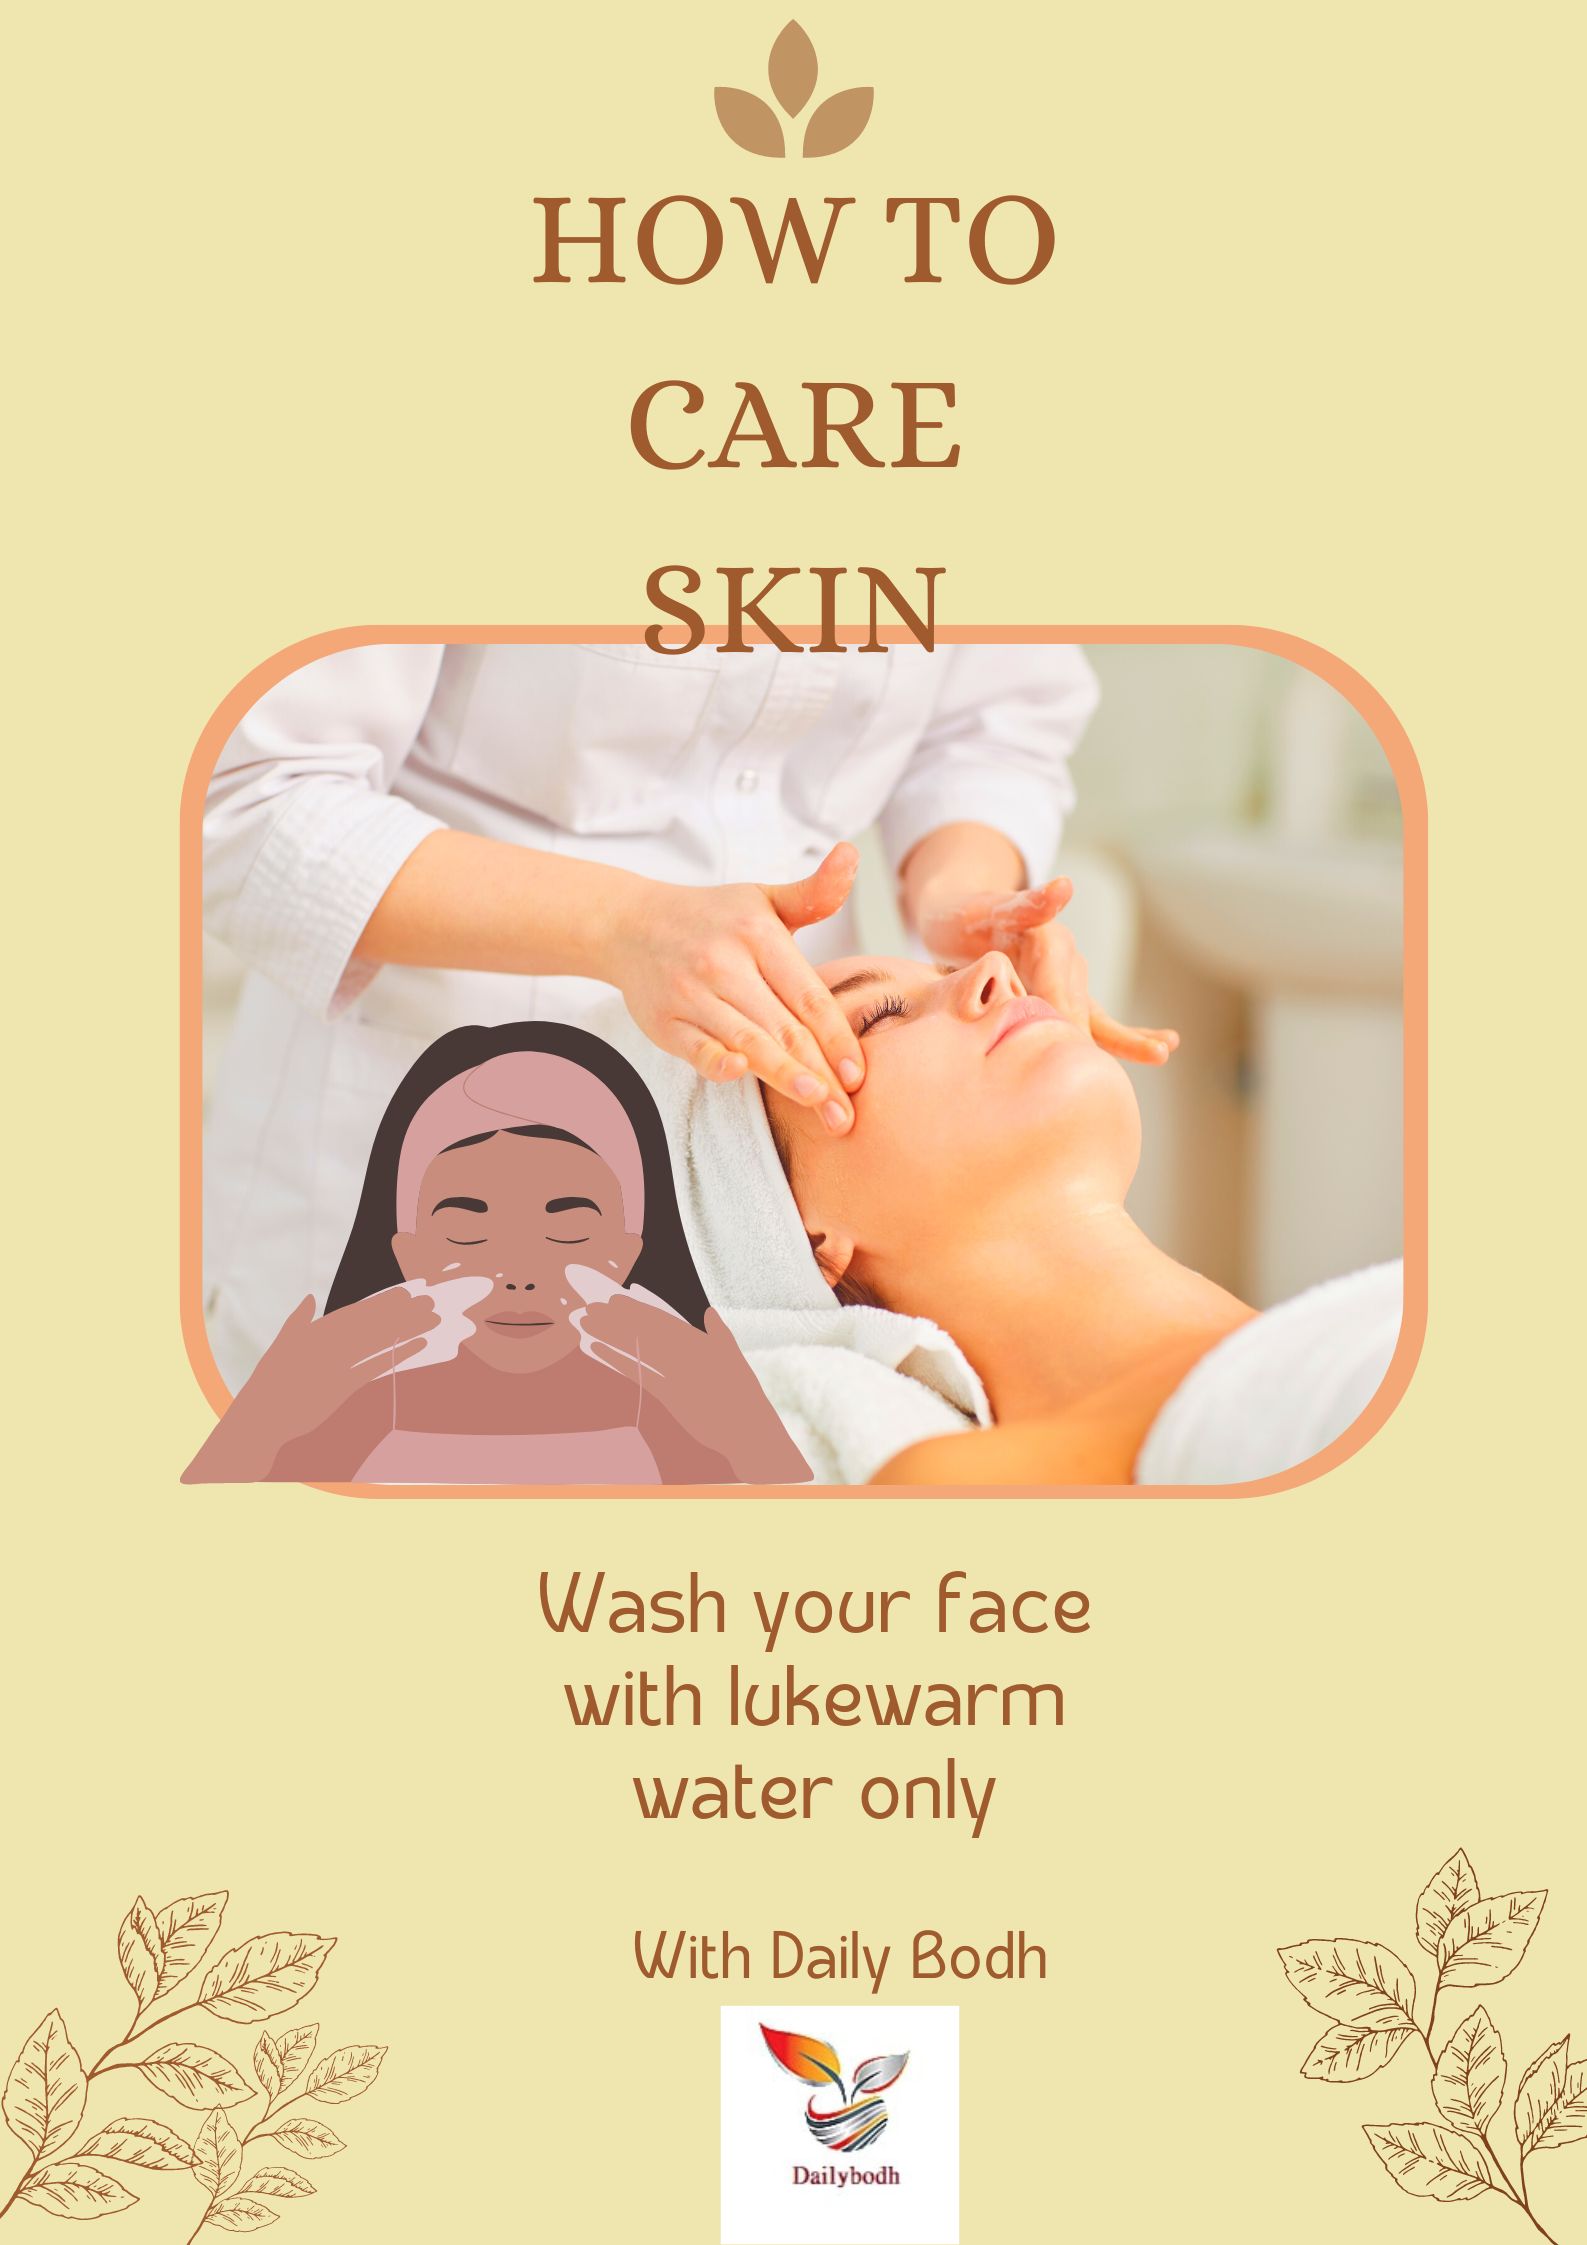 Wash your face with lukewarm water only (How to Care Skin)